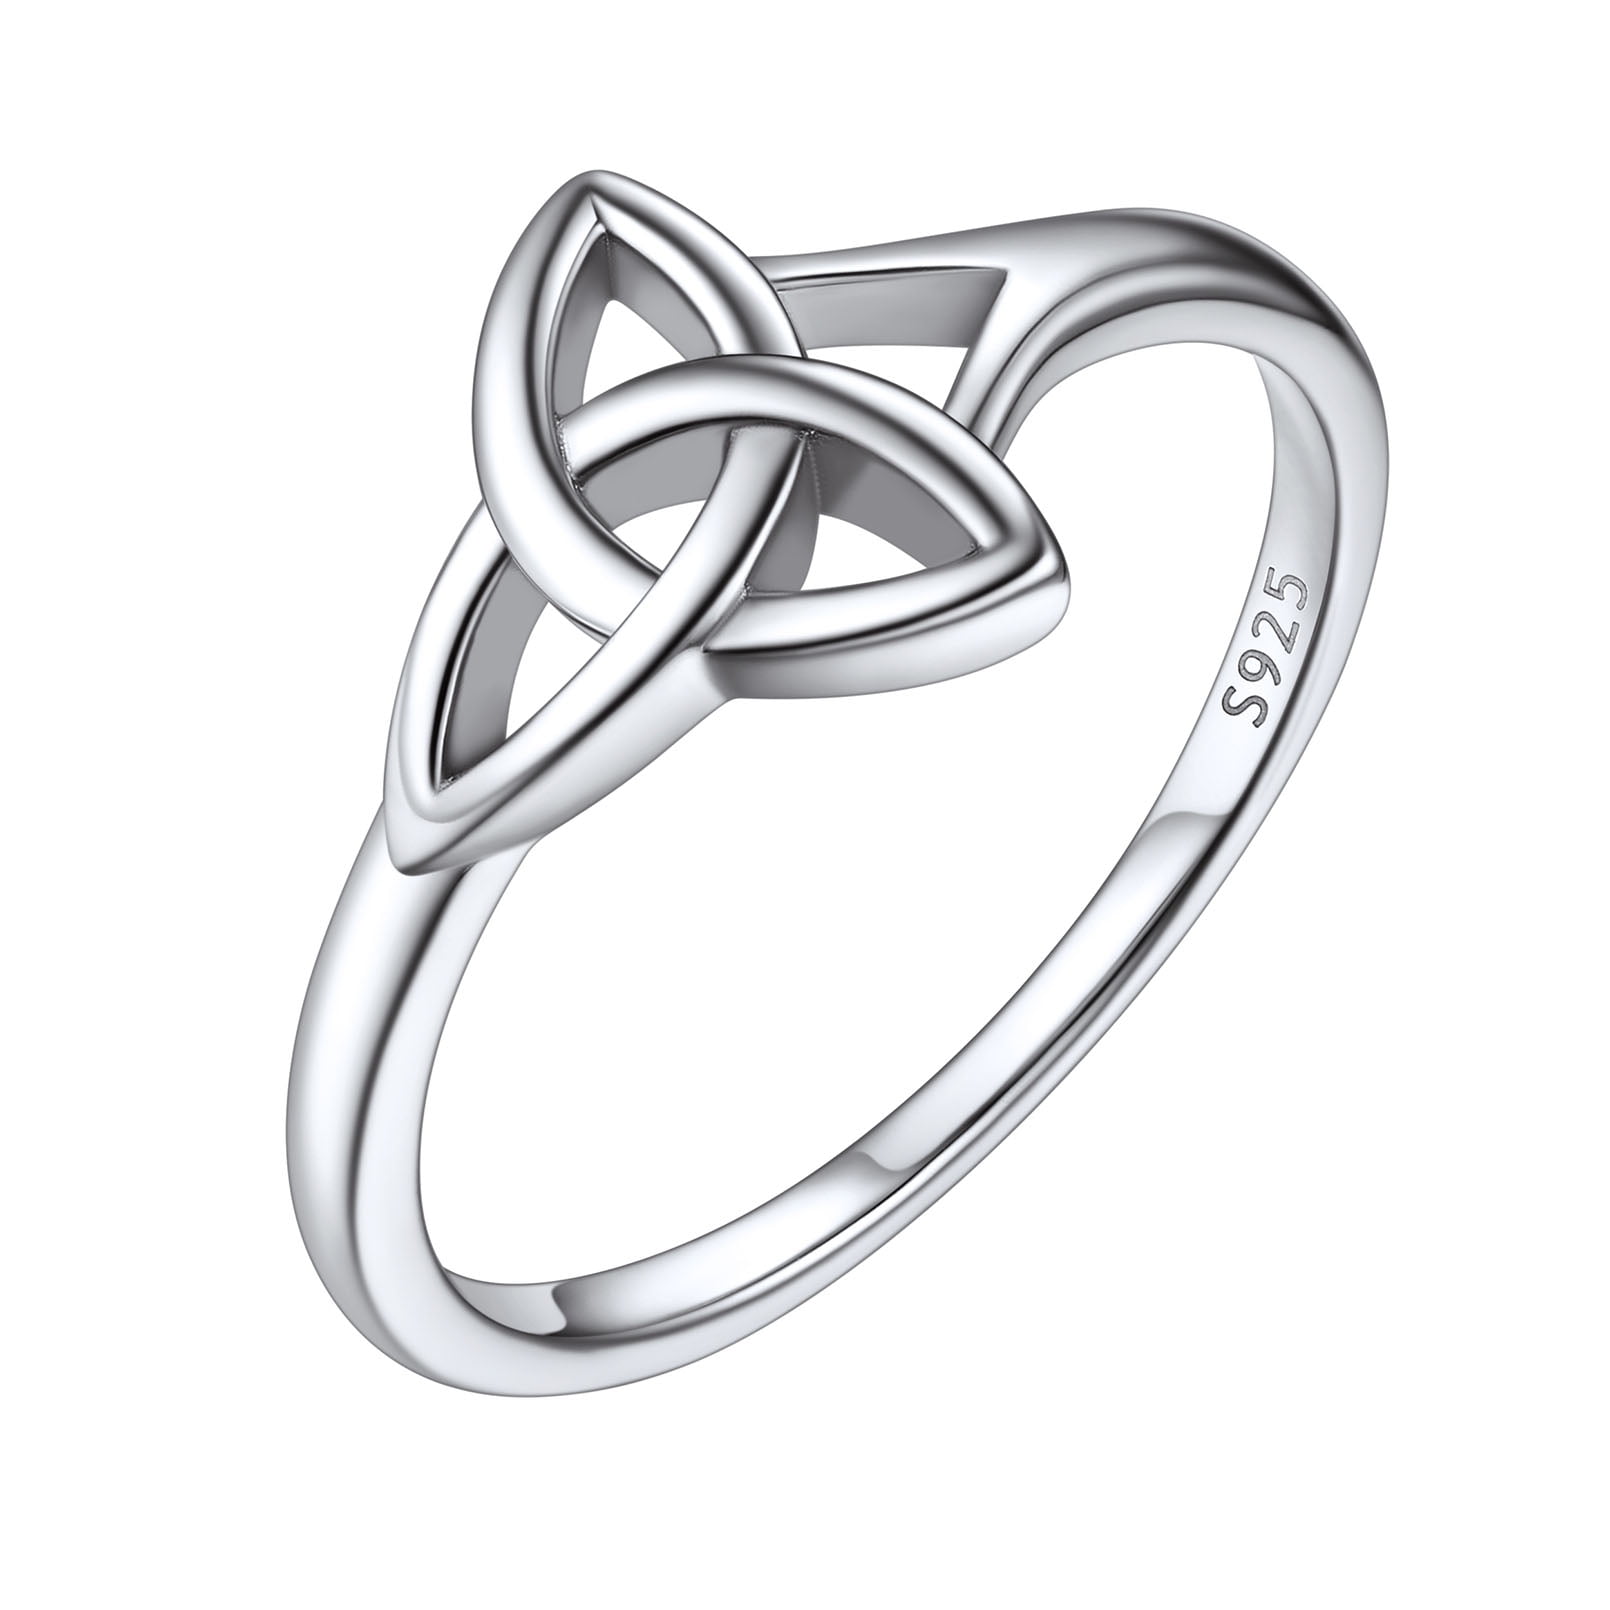 ChicSilver Women's Sterling Silver Ring Triquetra Celtic Knot